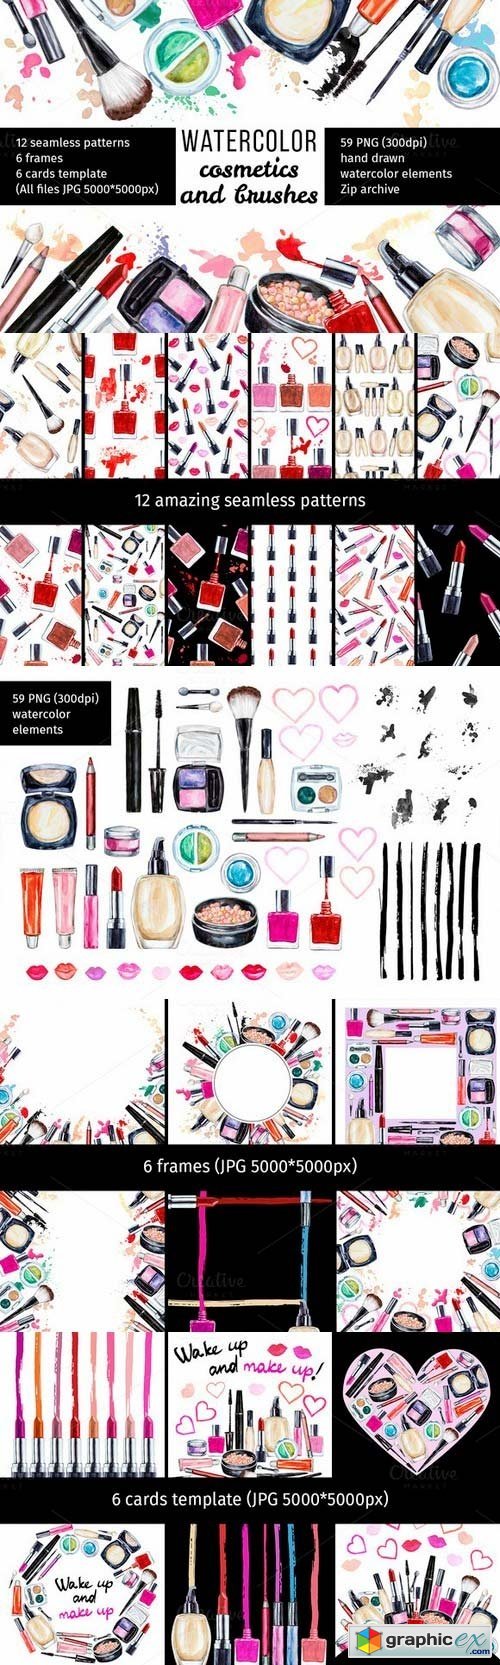 Watercolor cosmetic collection